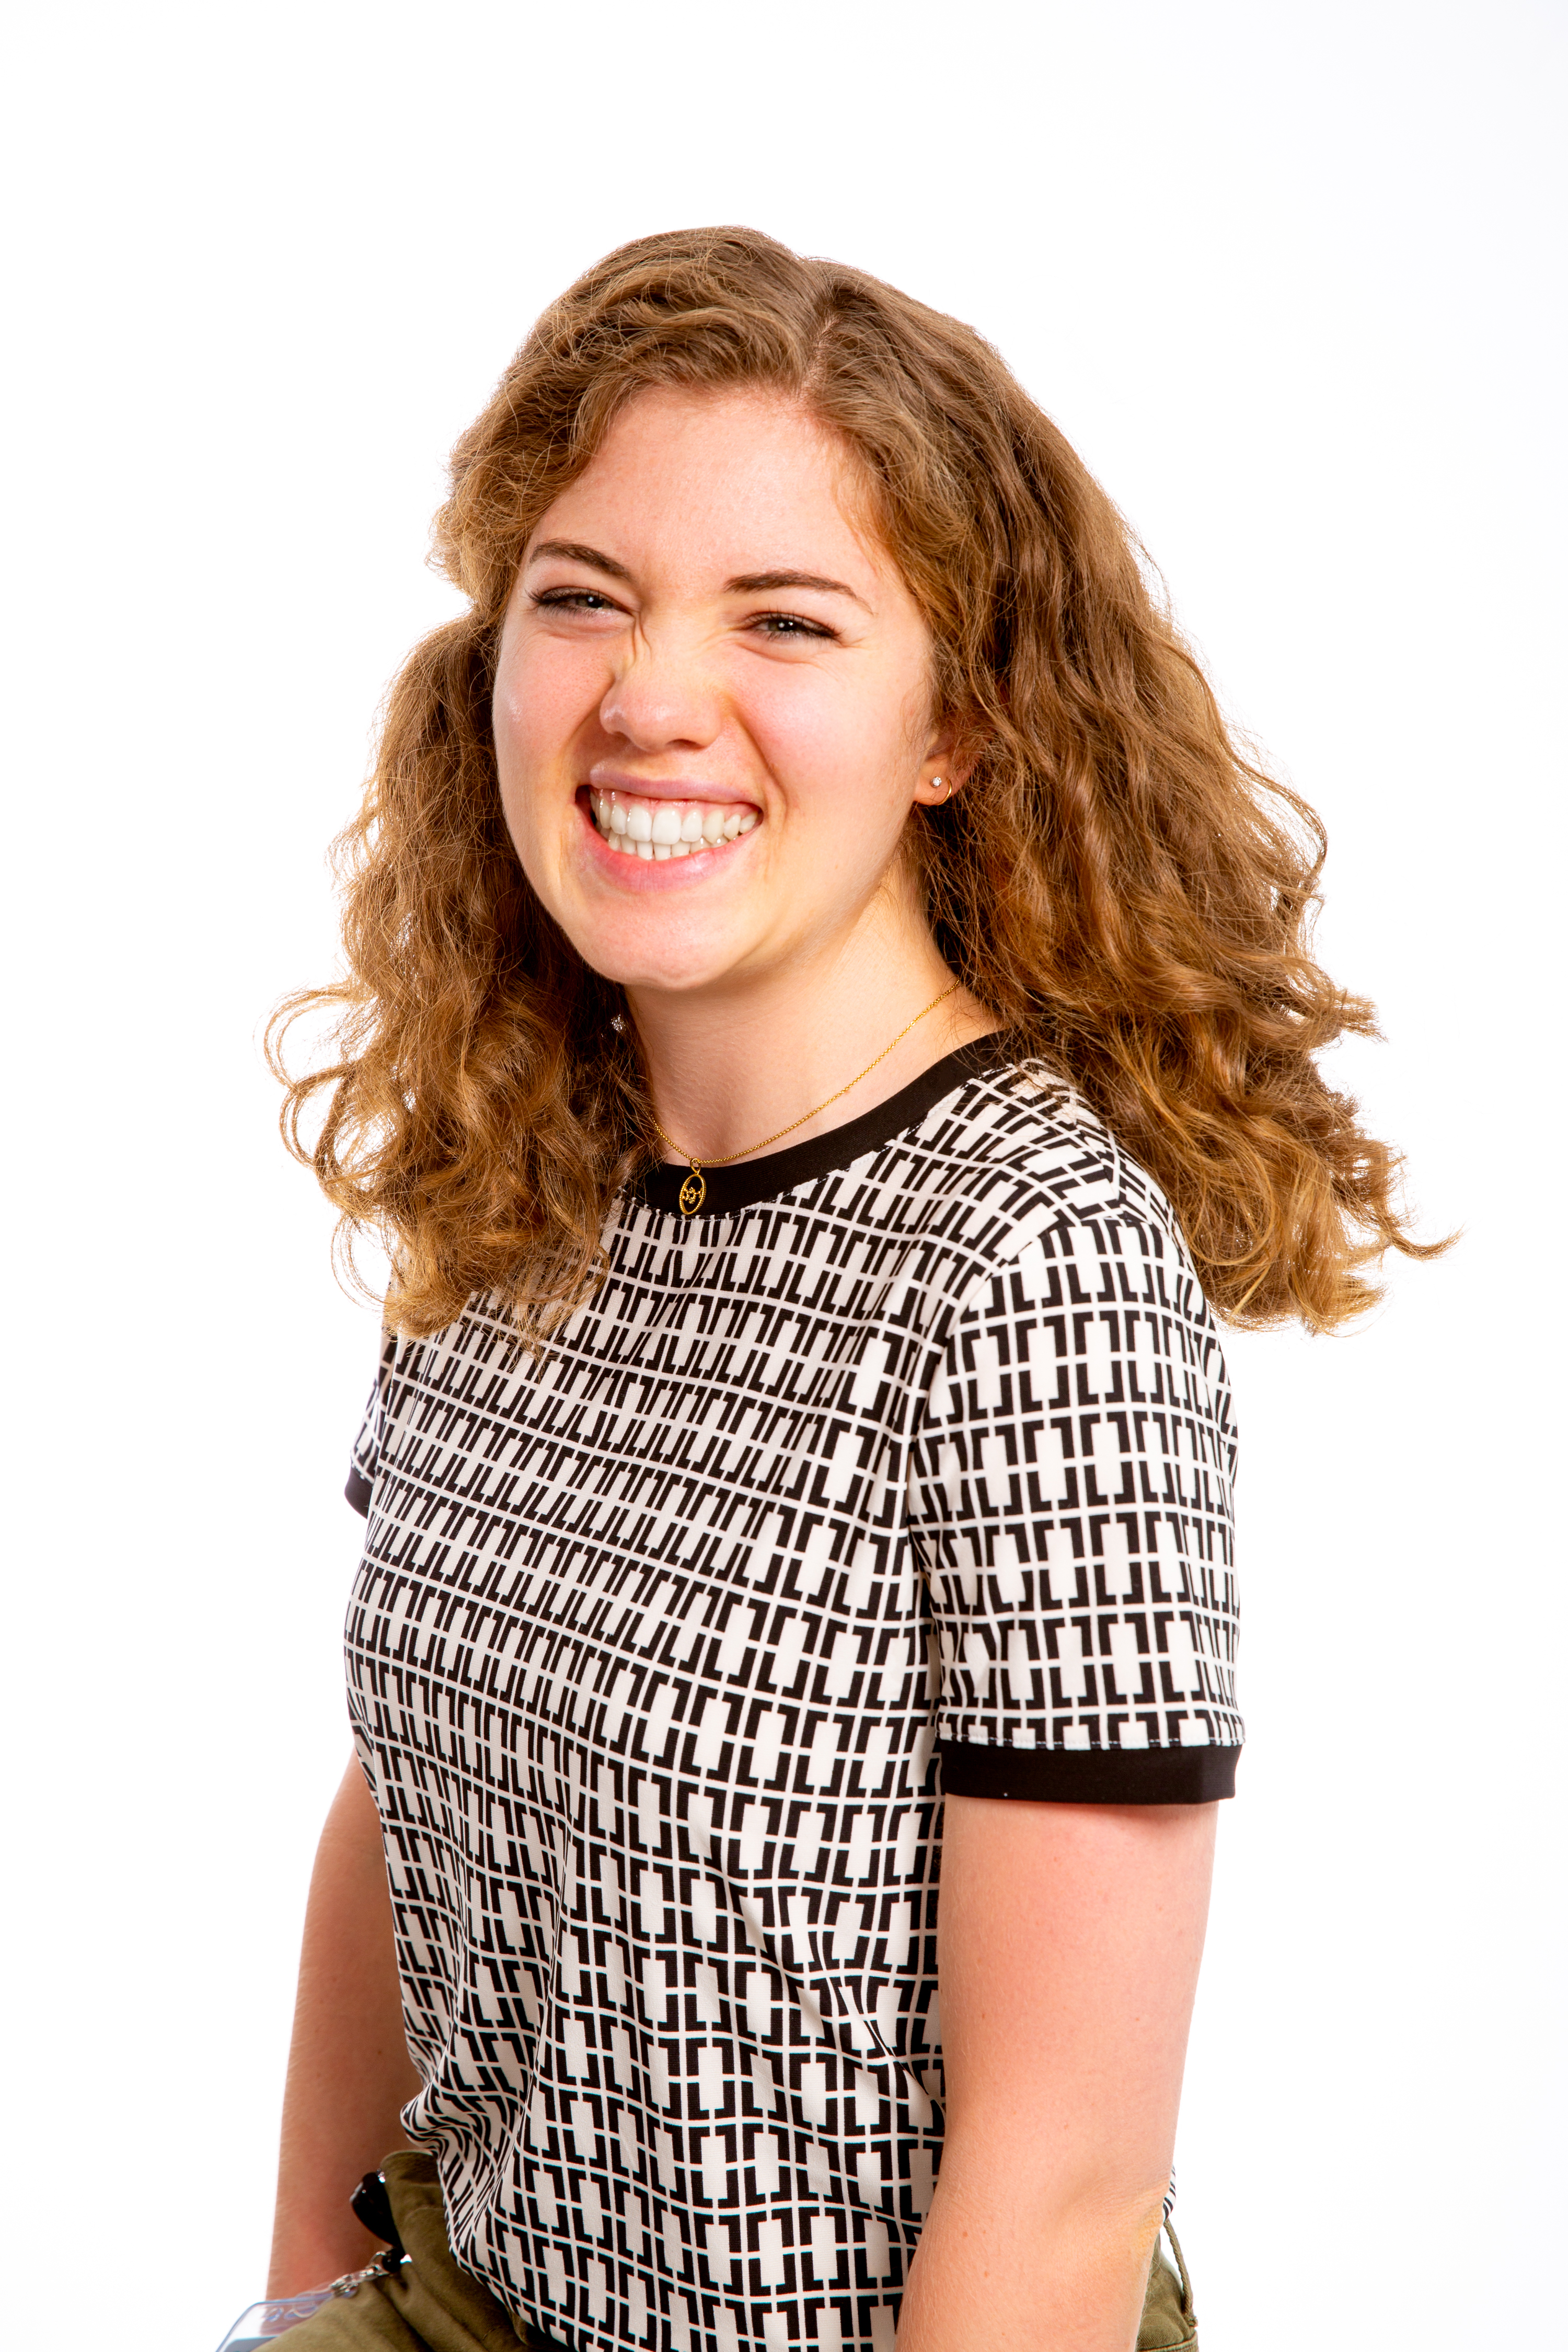 professional headshot photo of Caroline. She is wearing a black and white print shirt, has curly blonde/red hair and is smiling.